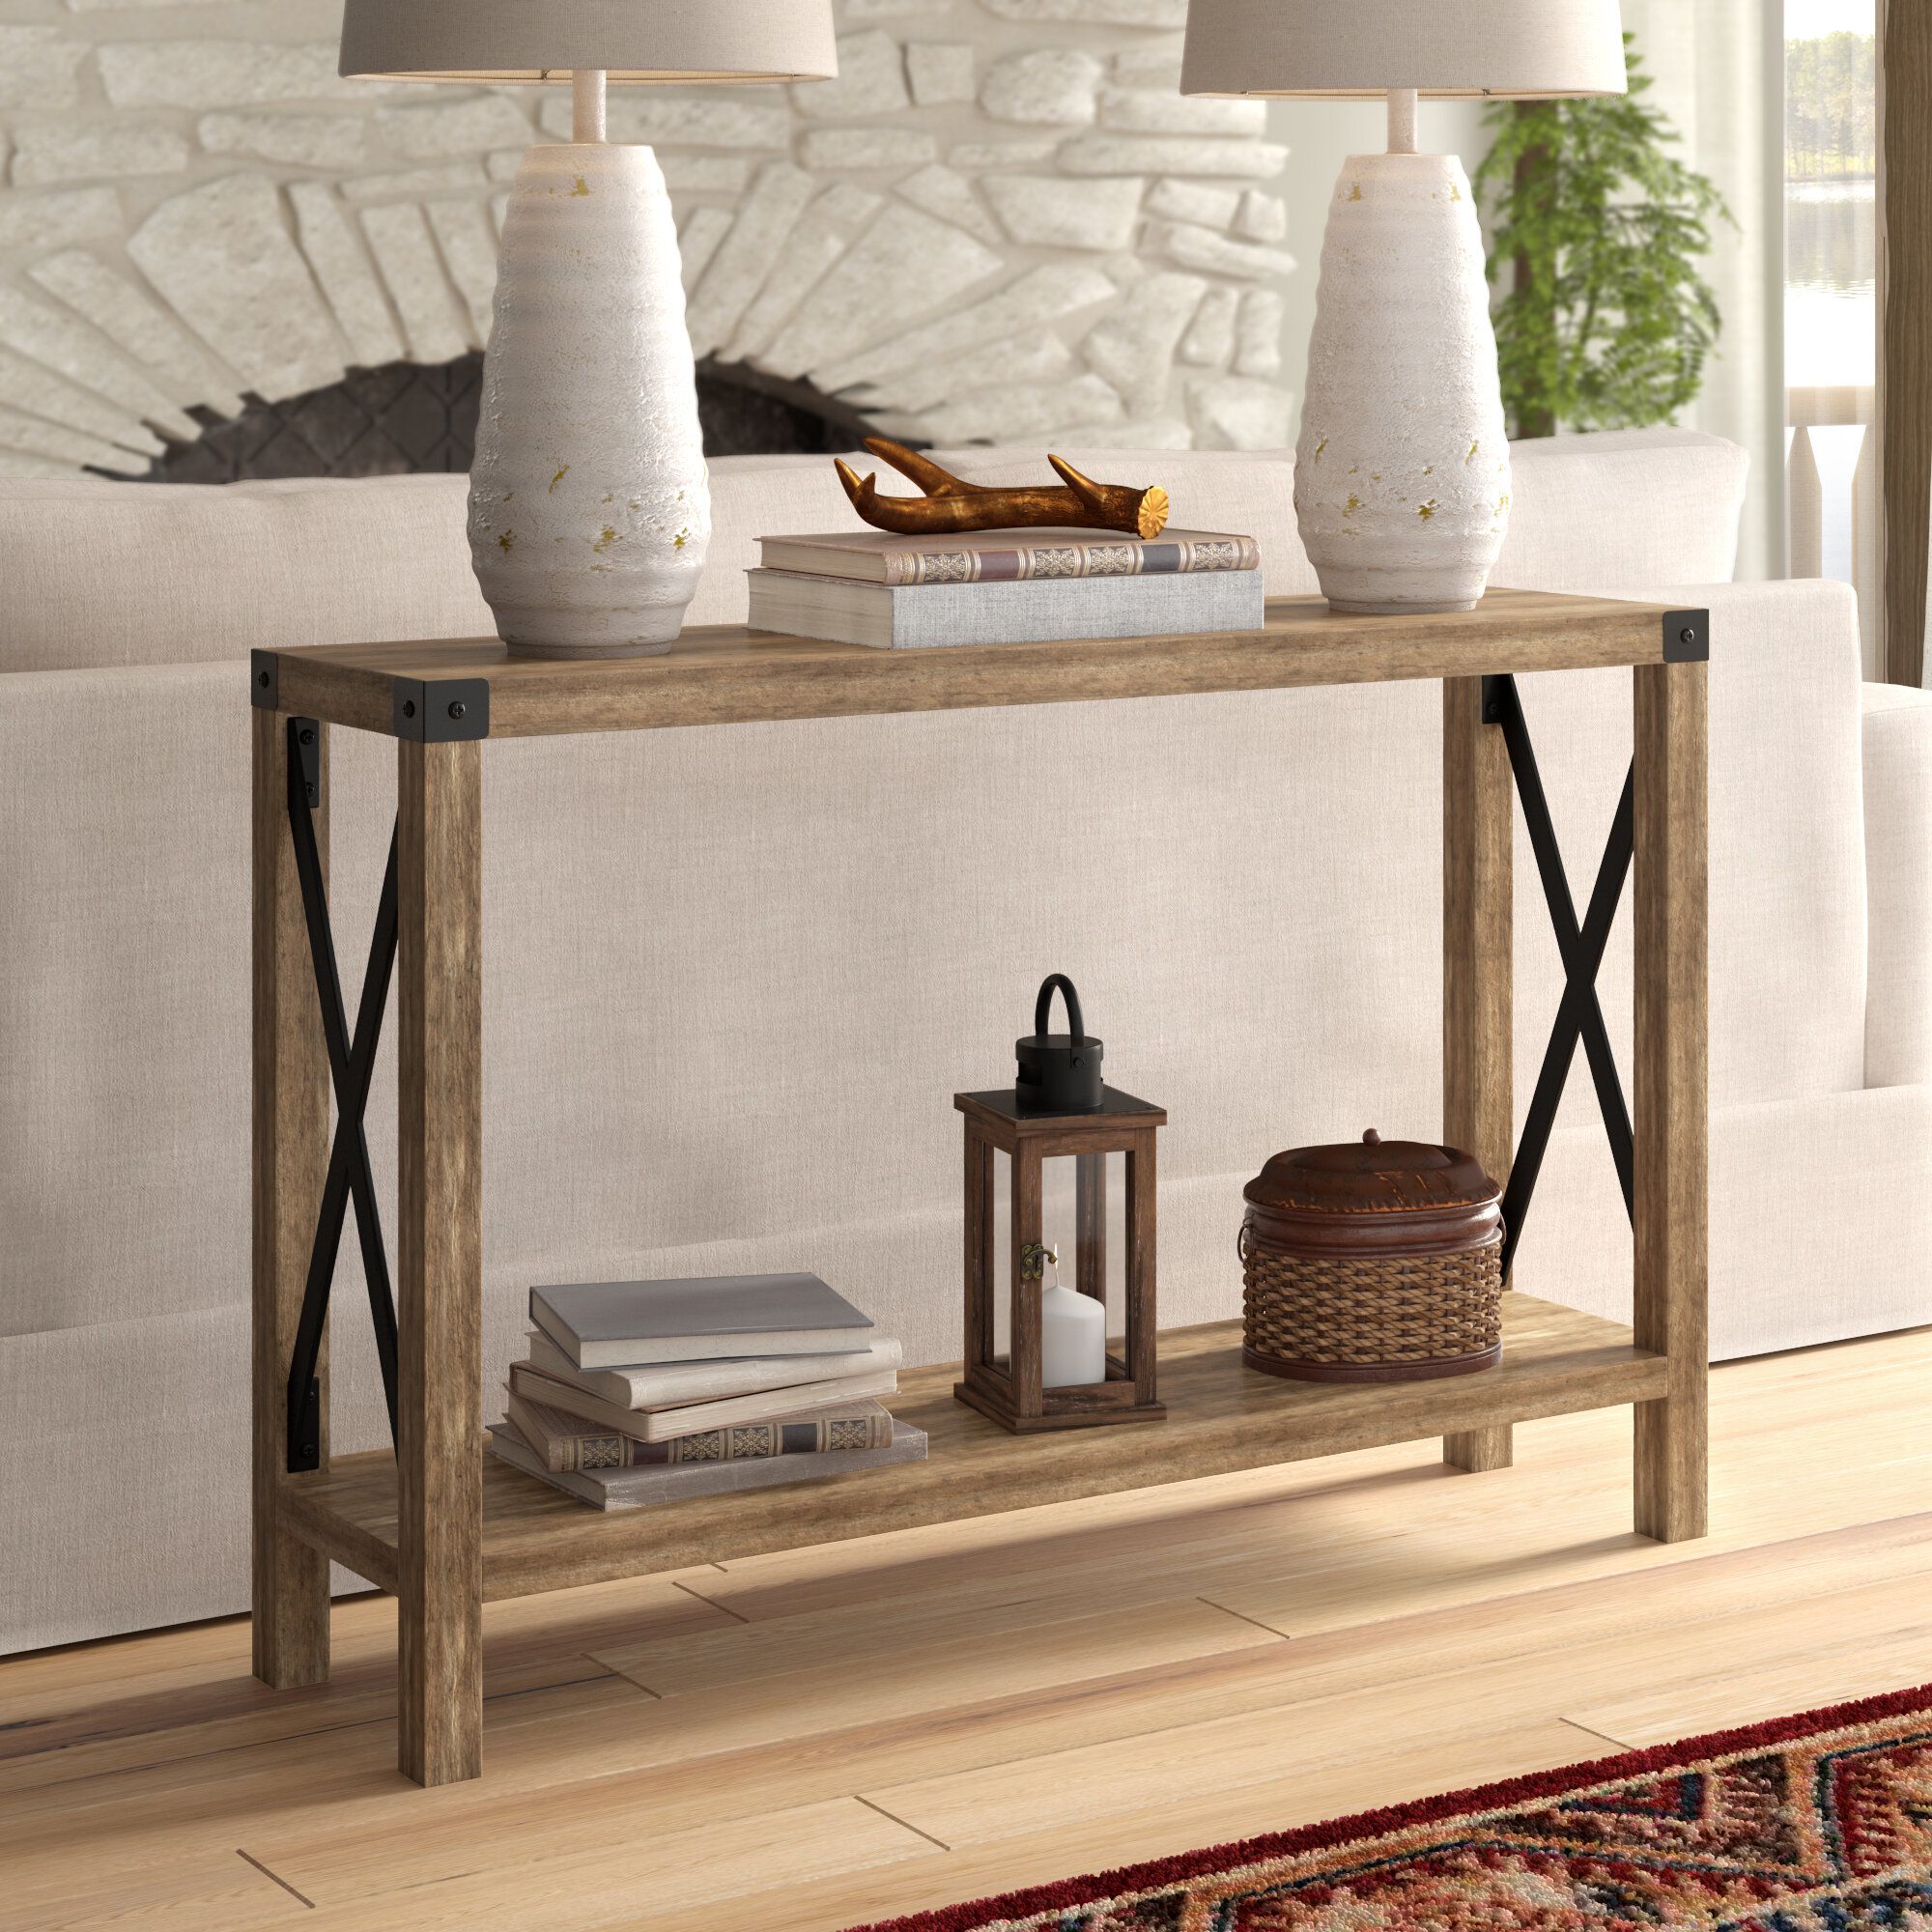 [big Sale] Console Tables With Storage You'll Love In 2021 In Walnut Wood Storage Trunk Console Tables (View 18 of 20)